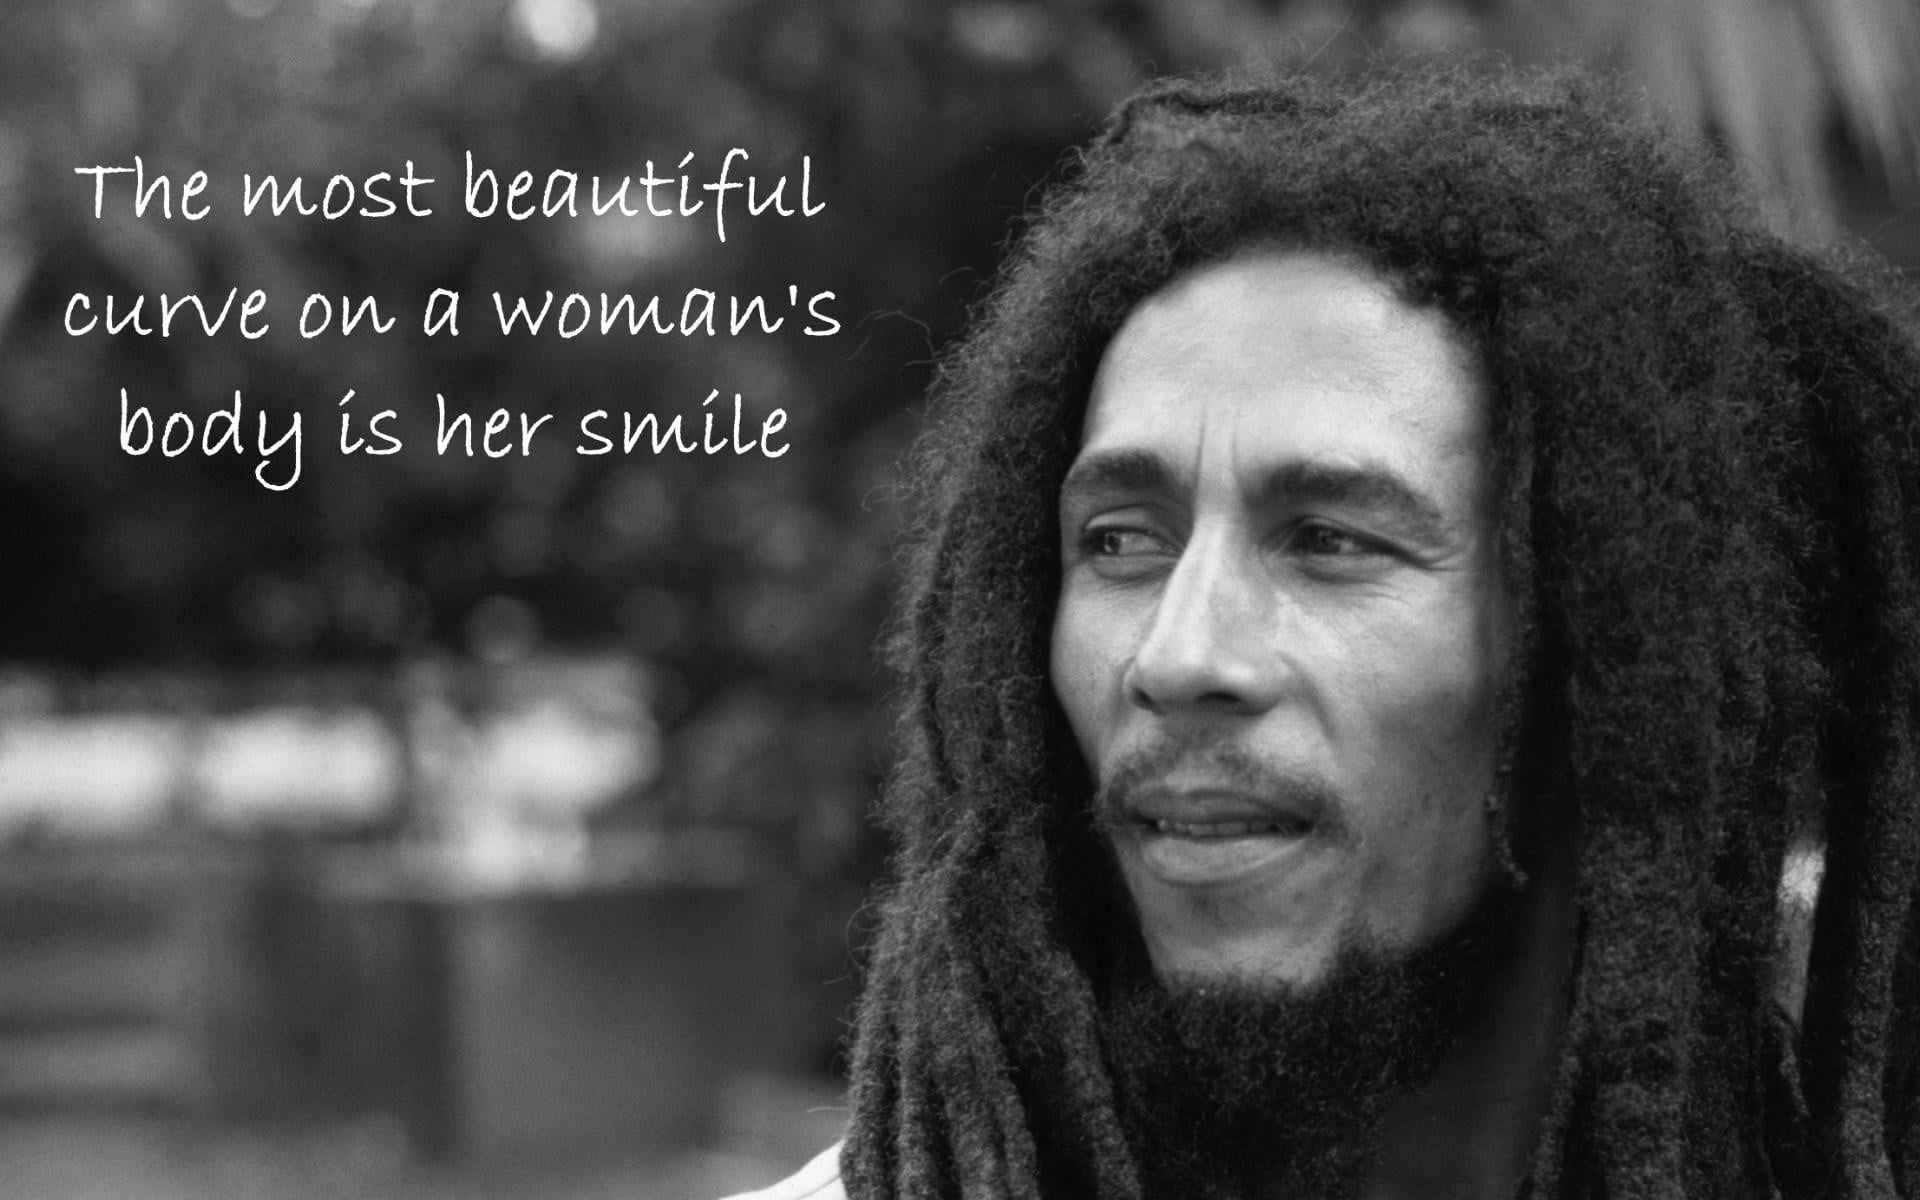 Wallpaper Bob Marley With Text Overlay, Quote, Monochrome